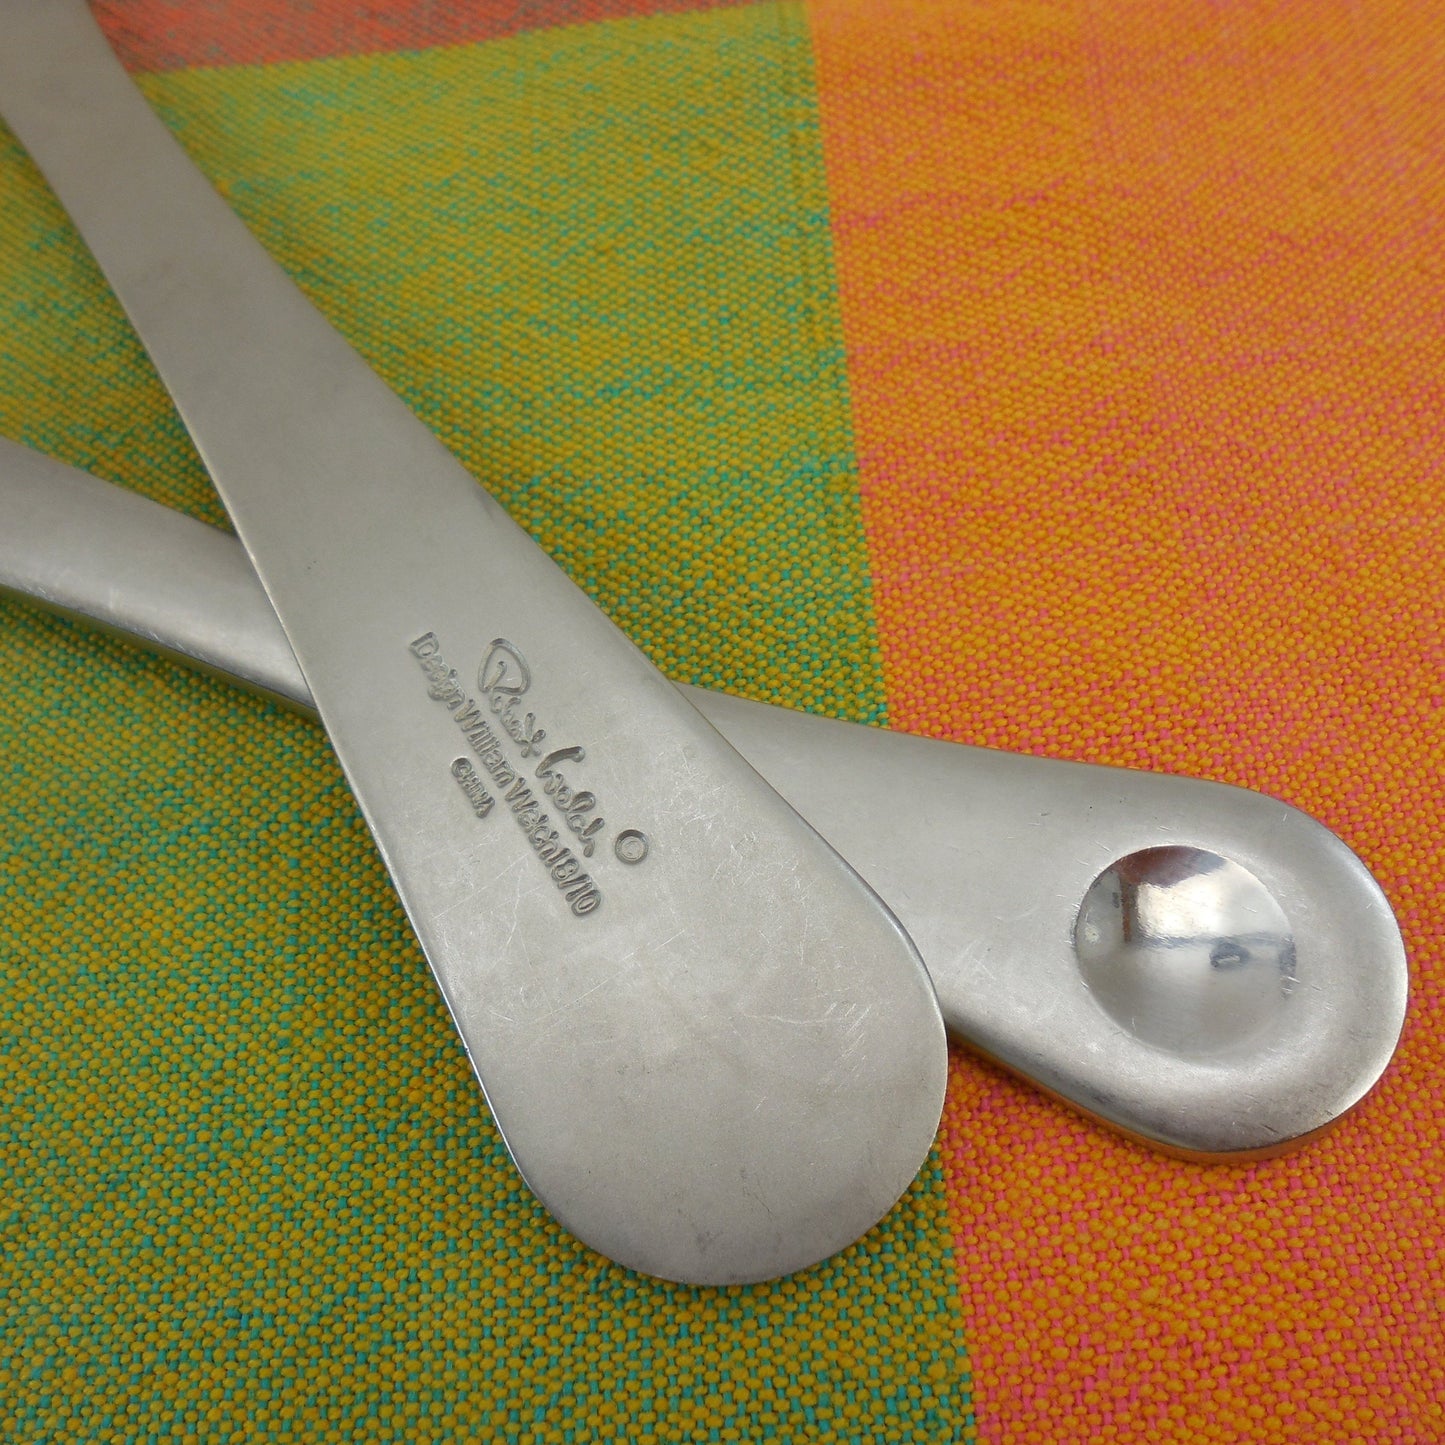 Robert Welch Pendulum Pattern Stainless Flatware - Slotted Serving Spoon and Dinner Fork.. signed logo